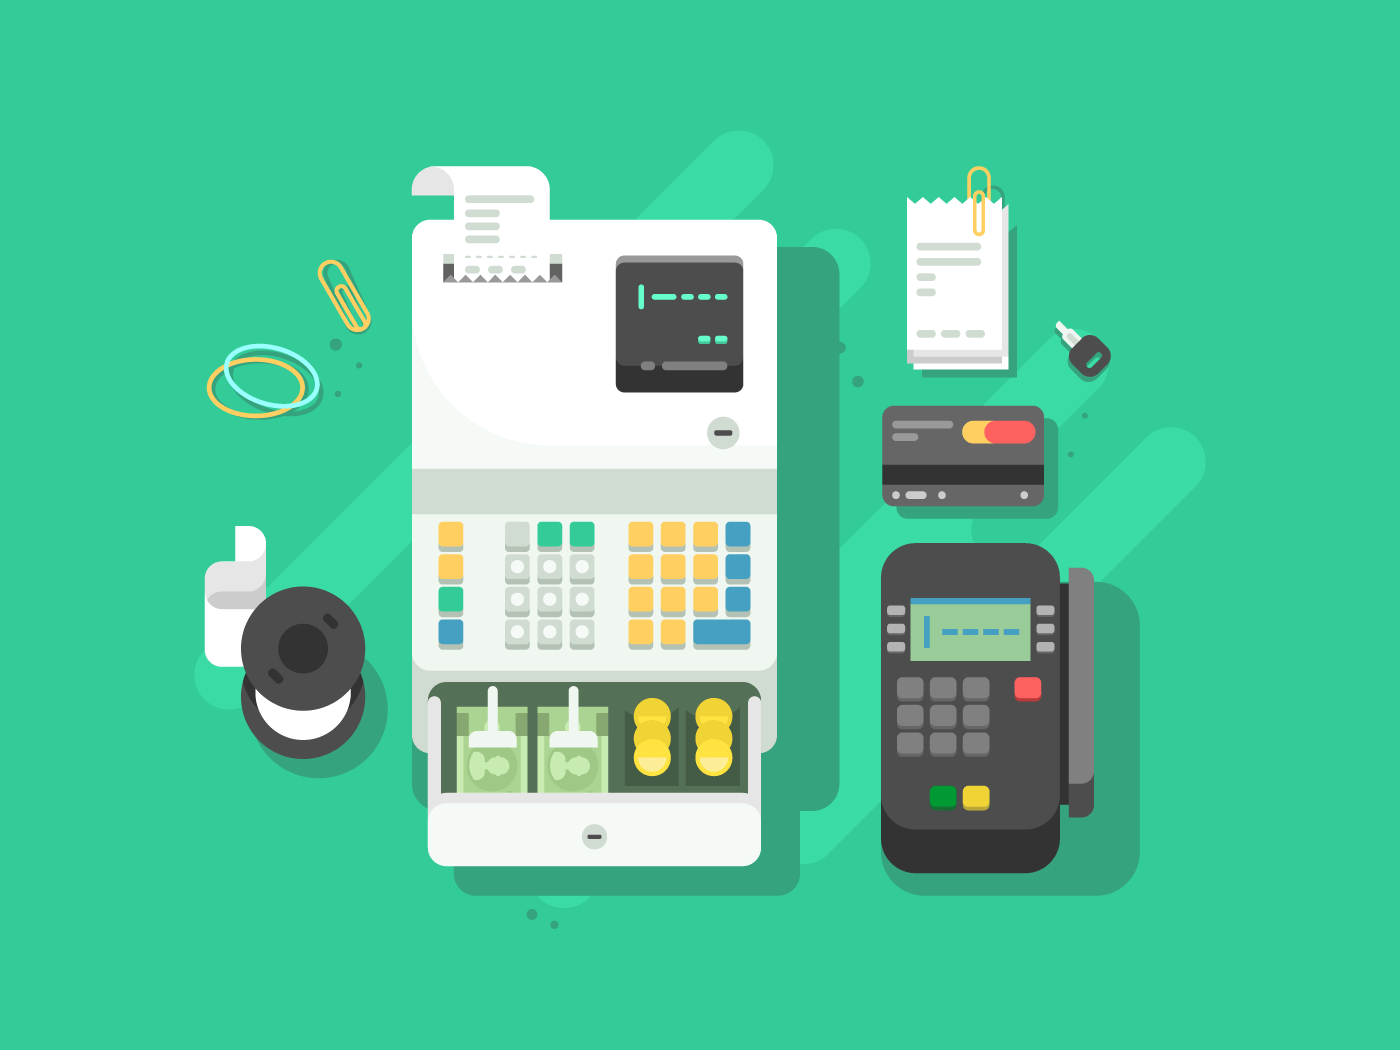 Cash machne and digital terminal for cards flat vector illustration